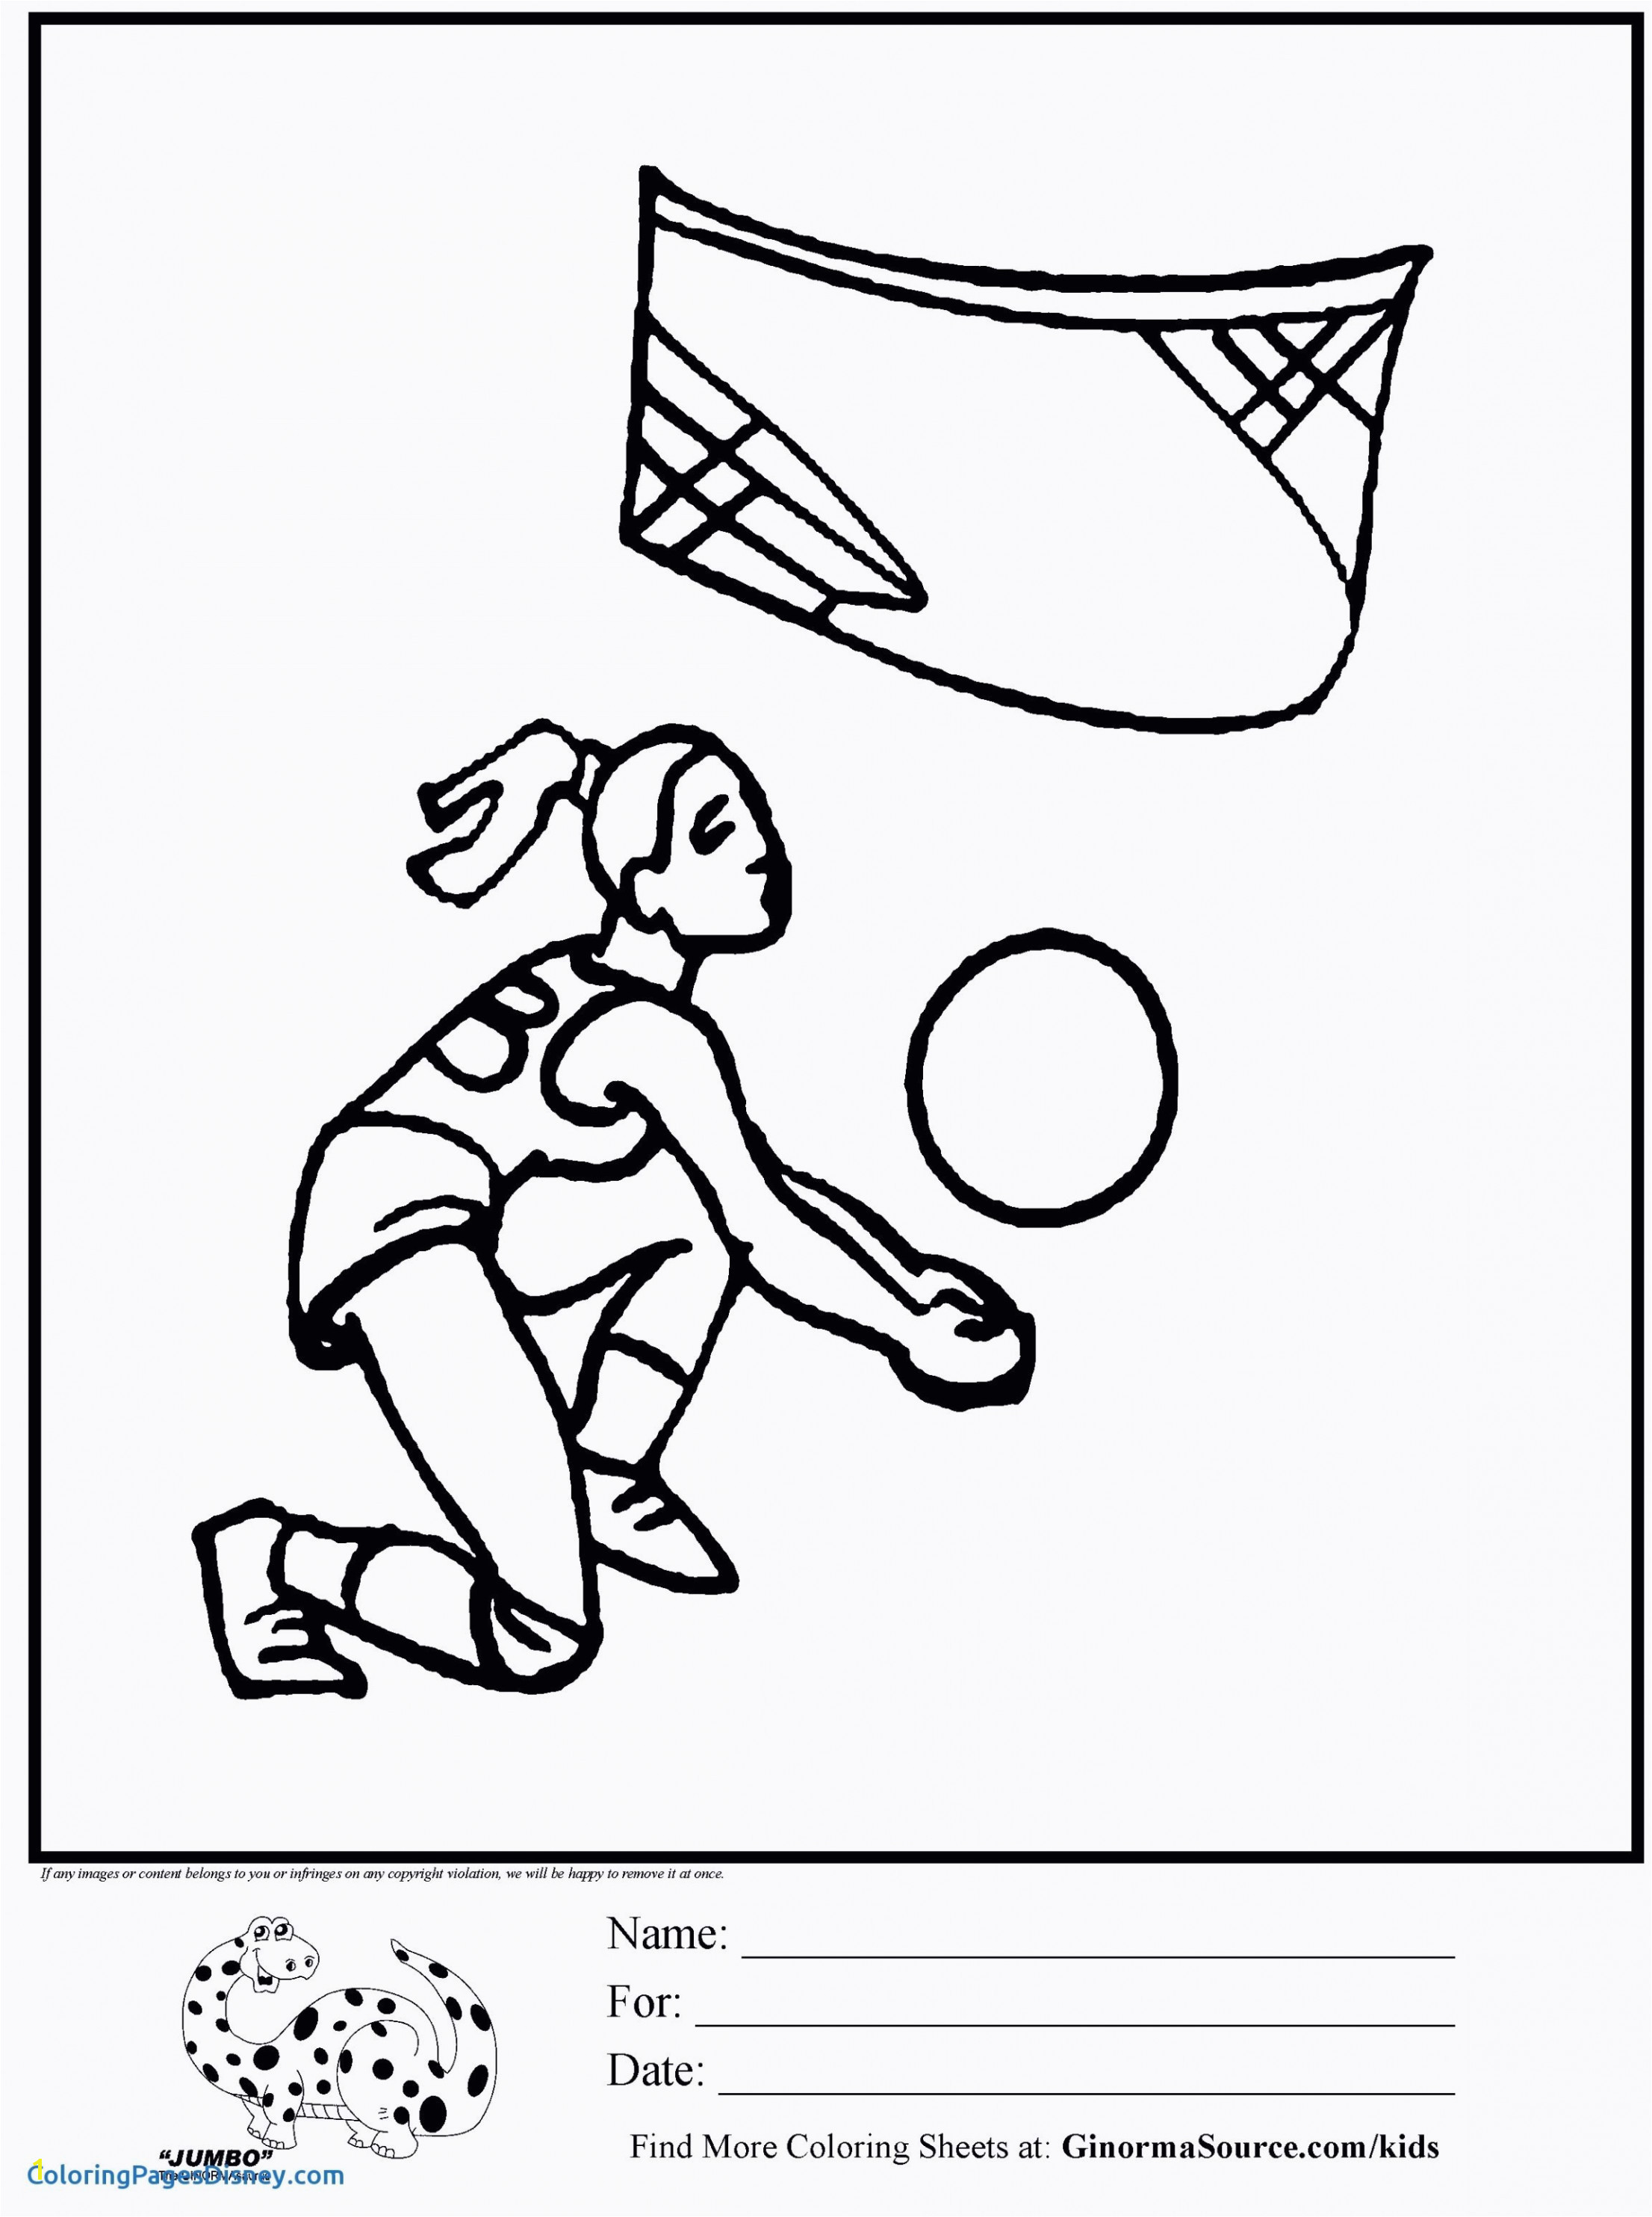 Coloring Pages Printables for Valentines Day Valentines Day Coloring Page